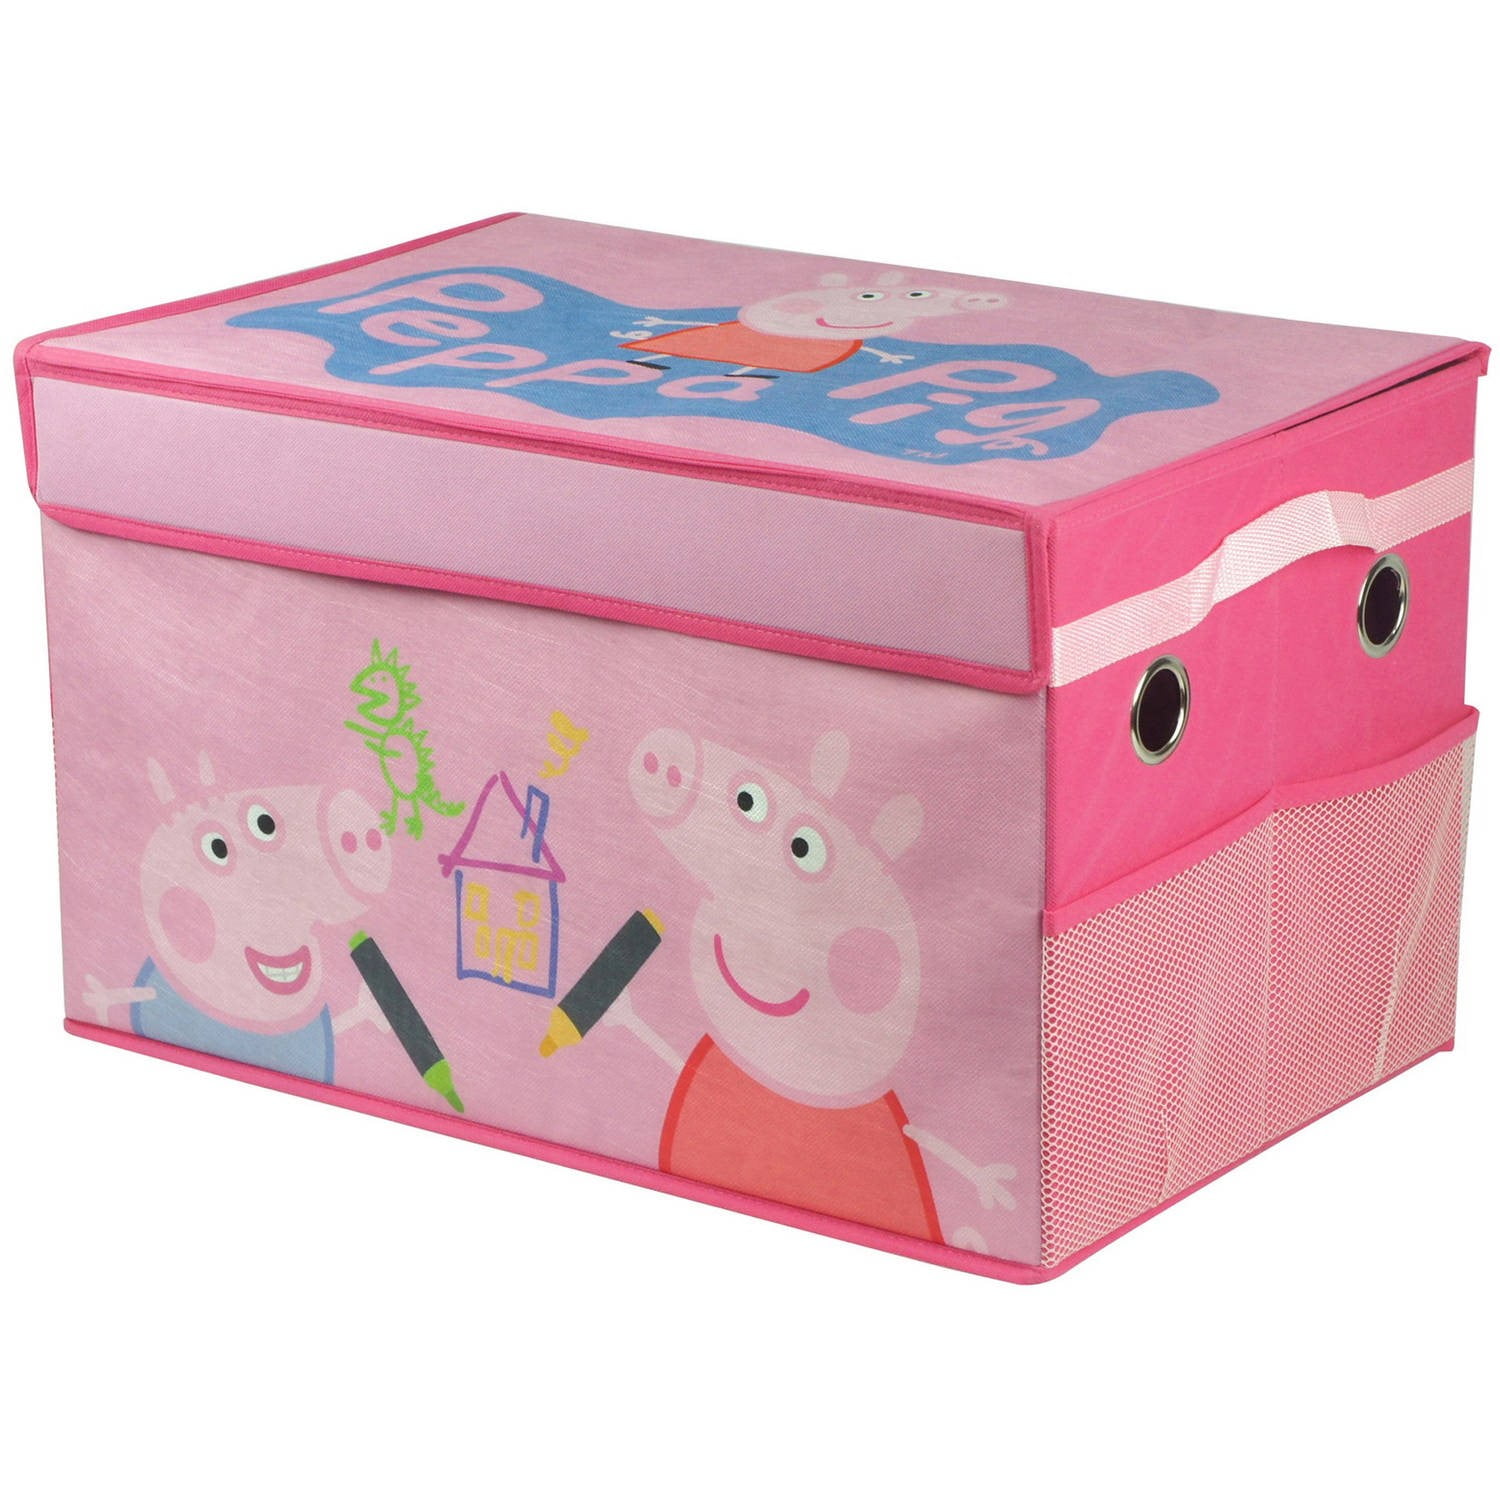 collapsible toy box walmart